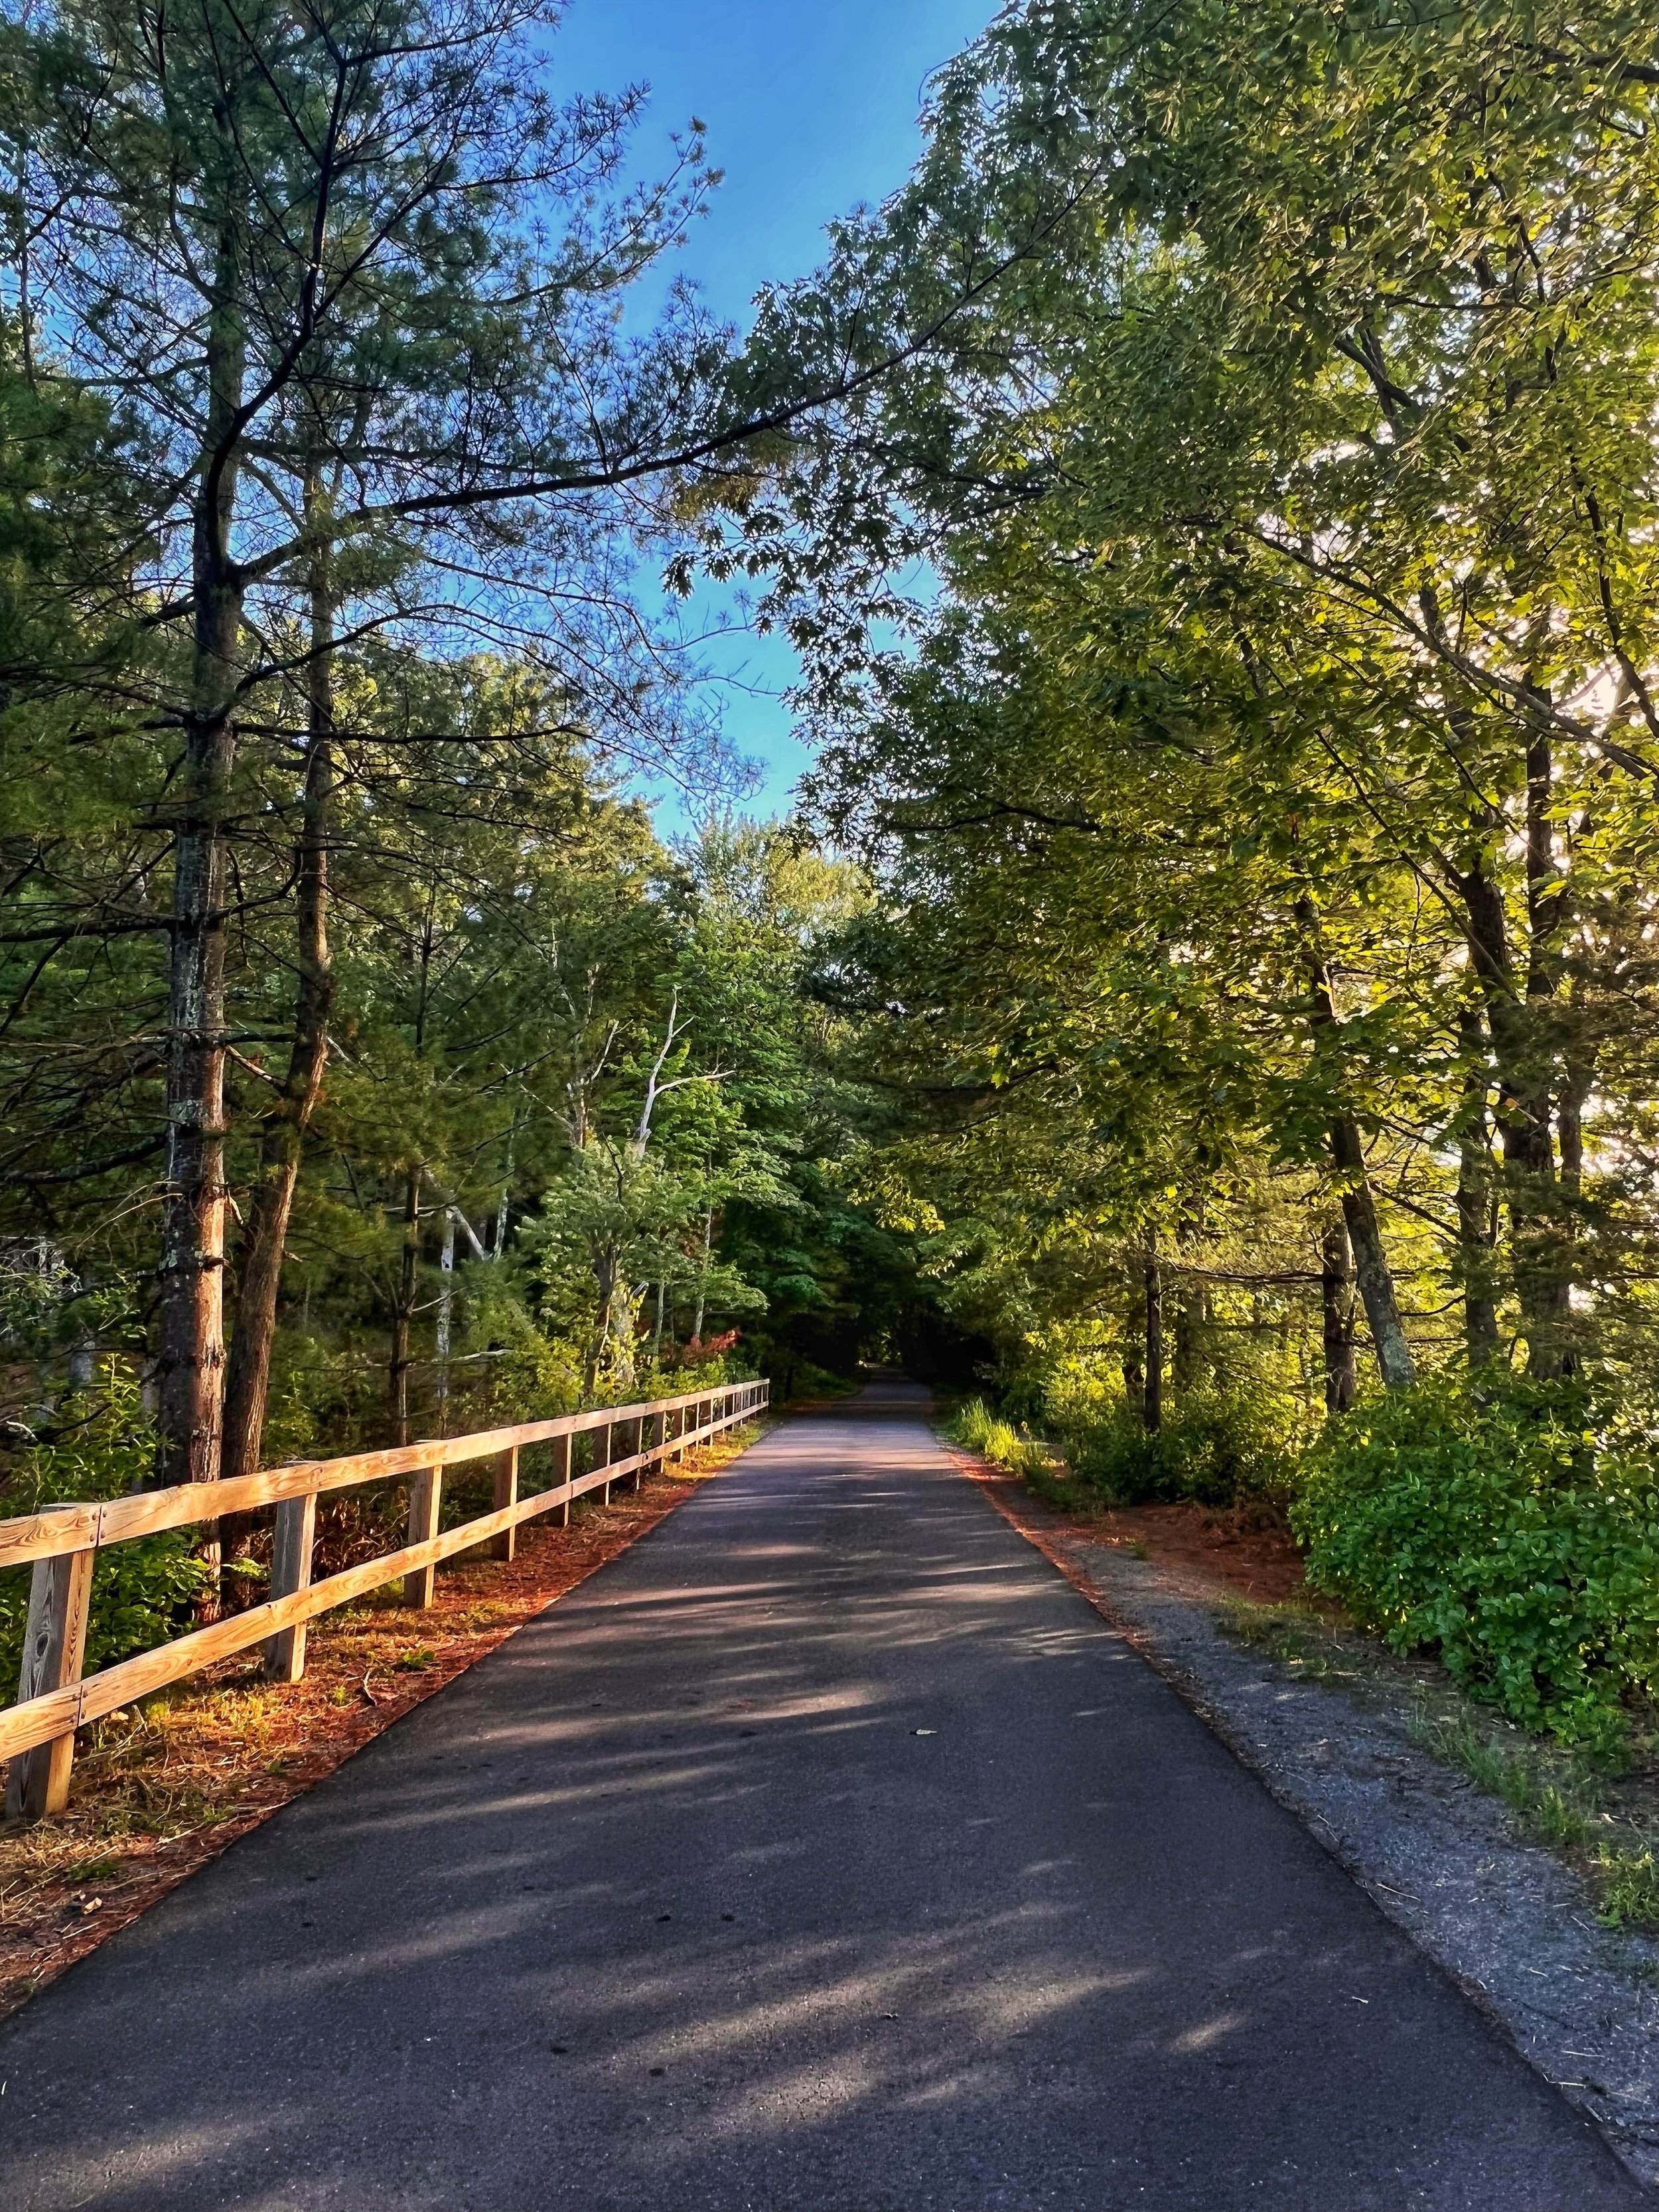 Maynard, MA has an overlooked access point for the Assabet River Rail Trail  and tasty craft beers — MassDayTripping - hiking, beers and fun attractions